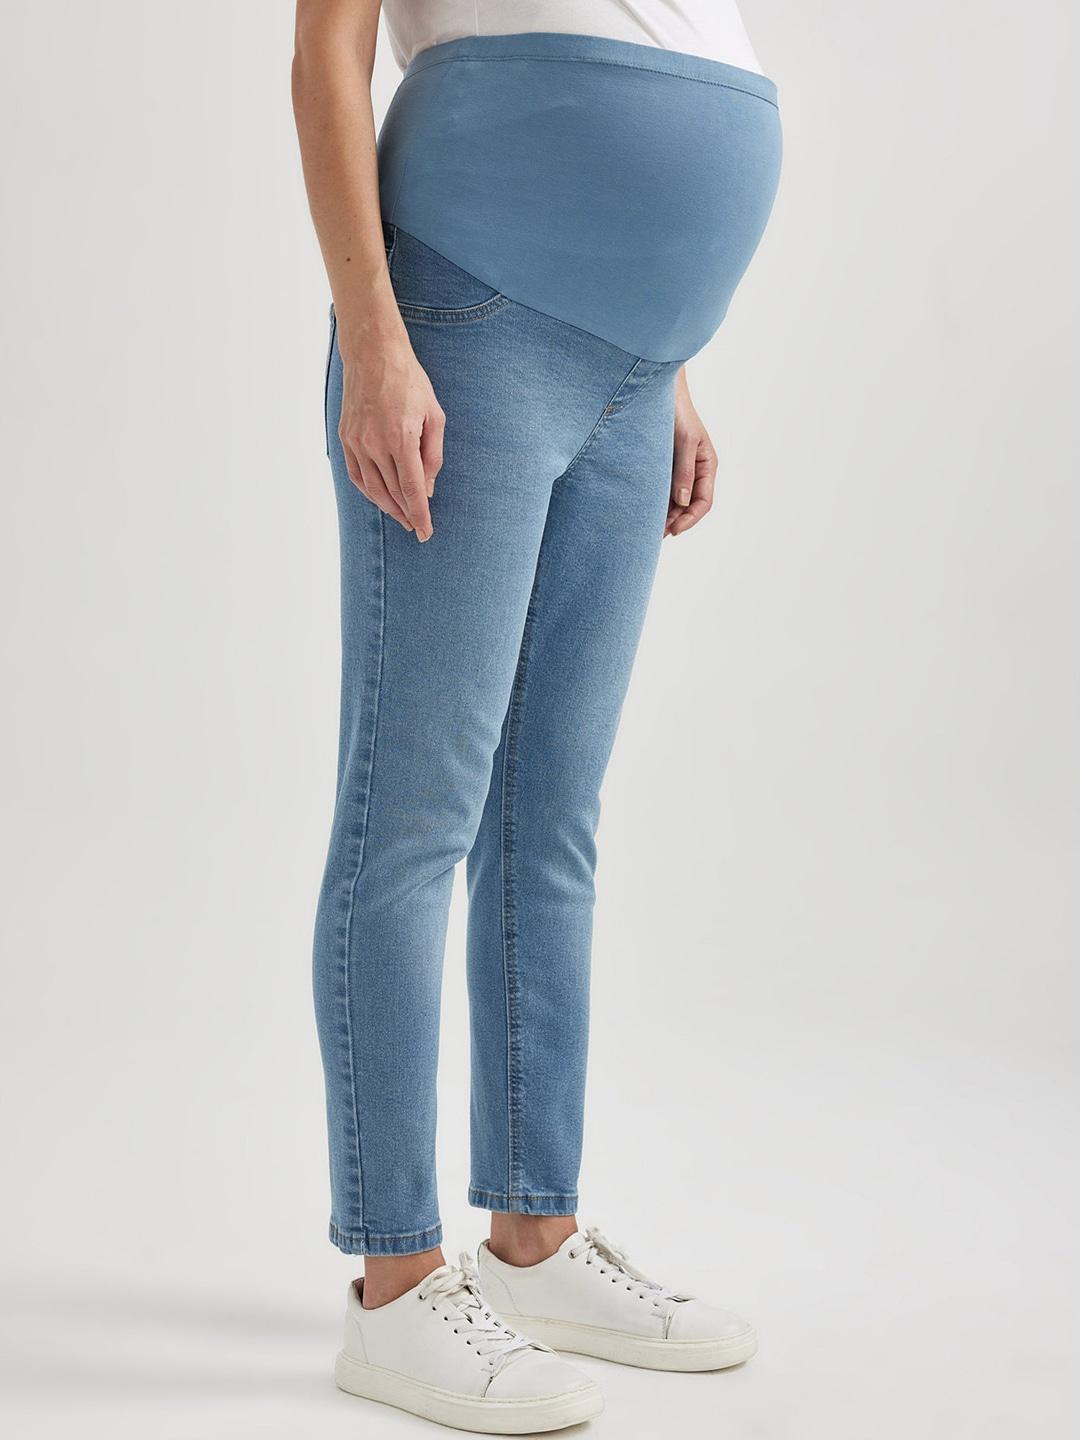 defacto-women-maternity-high-rise-clean-look-stretchable-jeans